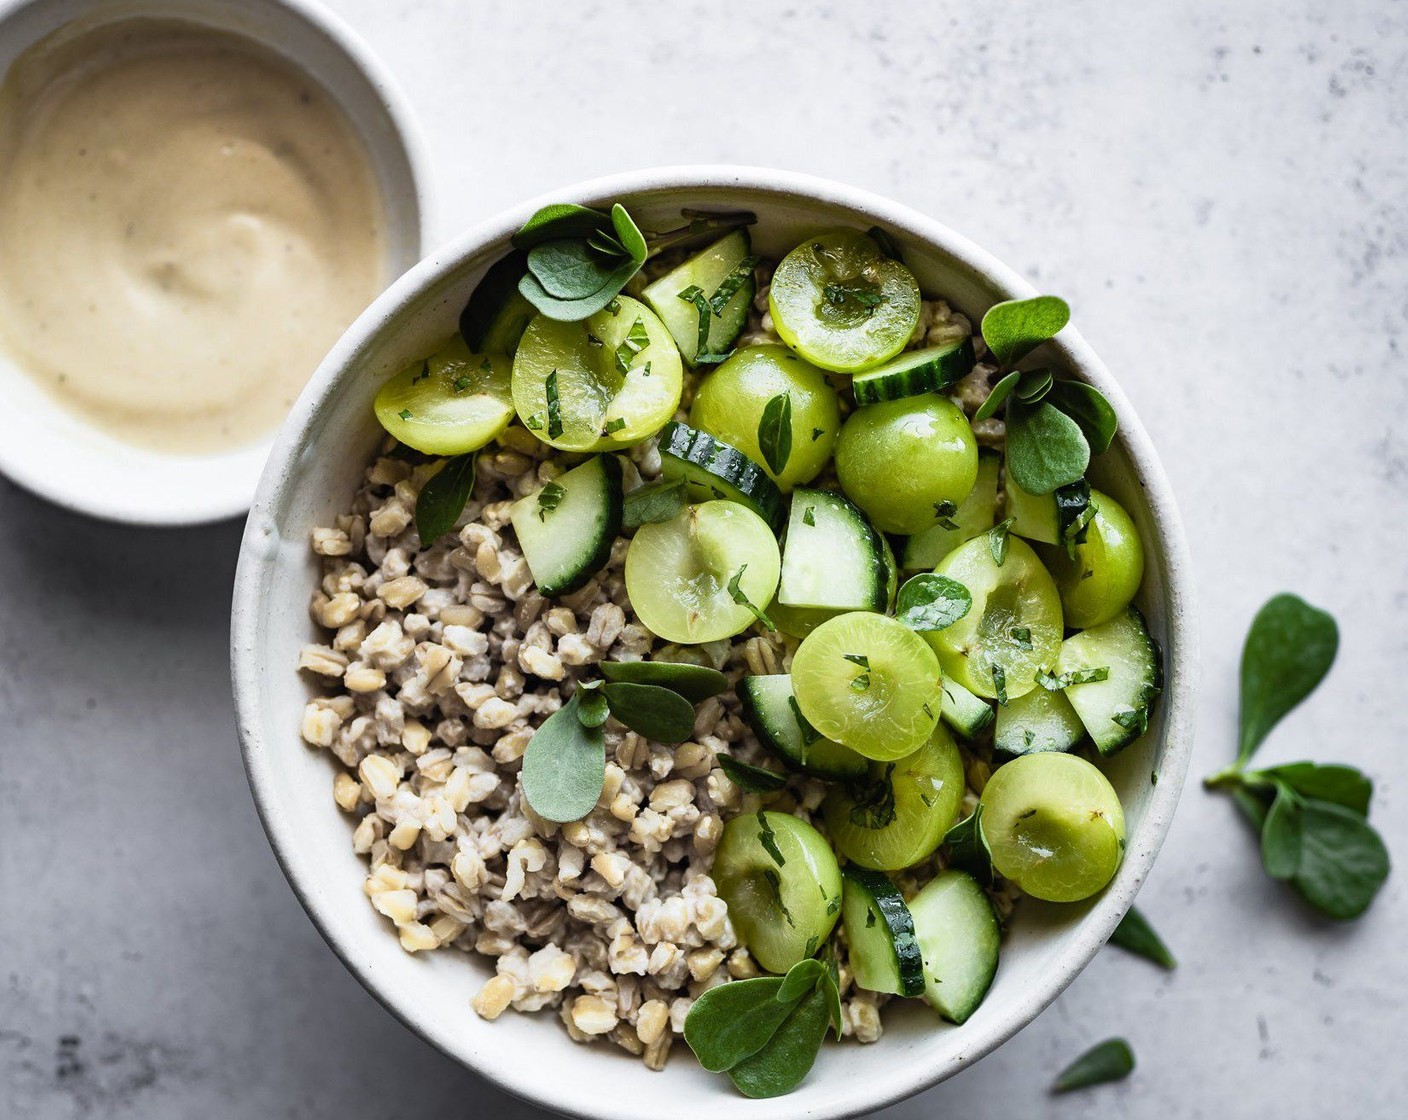 step 5 To serve, fill bowls with prepared wheat berries, top with marinated plum, cucumber salad, and garnish with Purslane (to taste) or other seasonal green. Add more dressing over the top as desired.